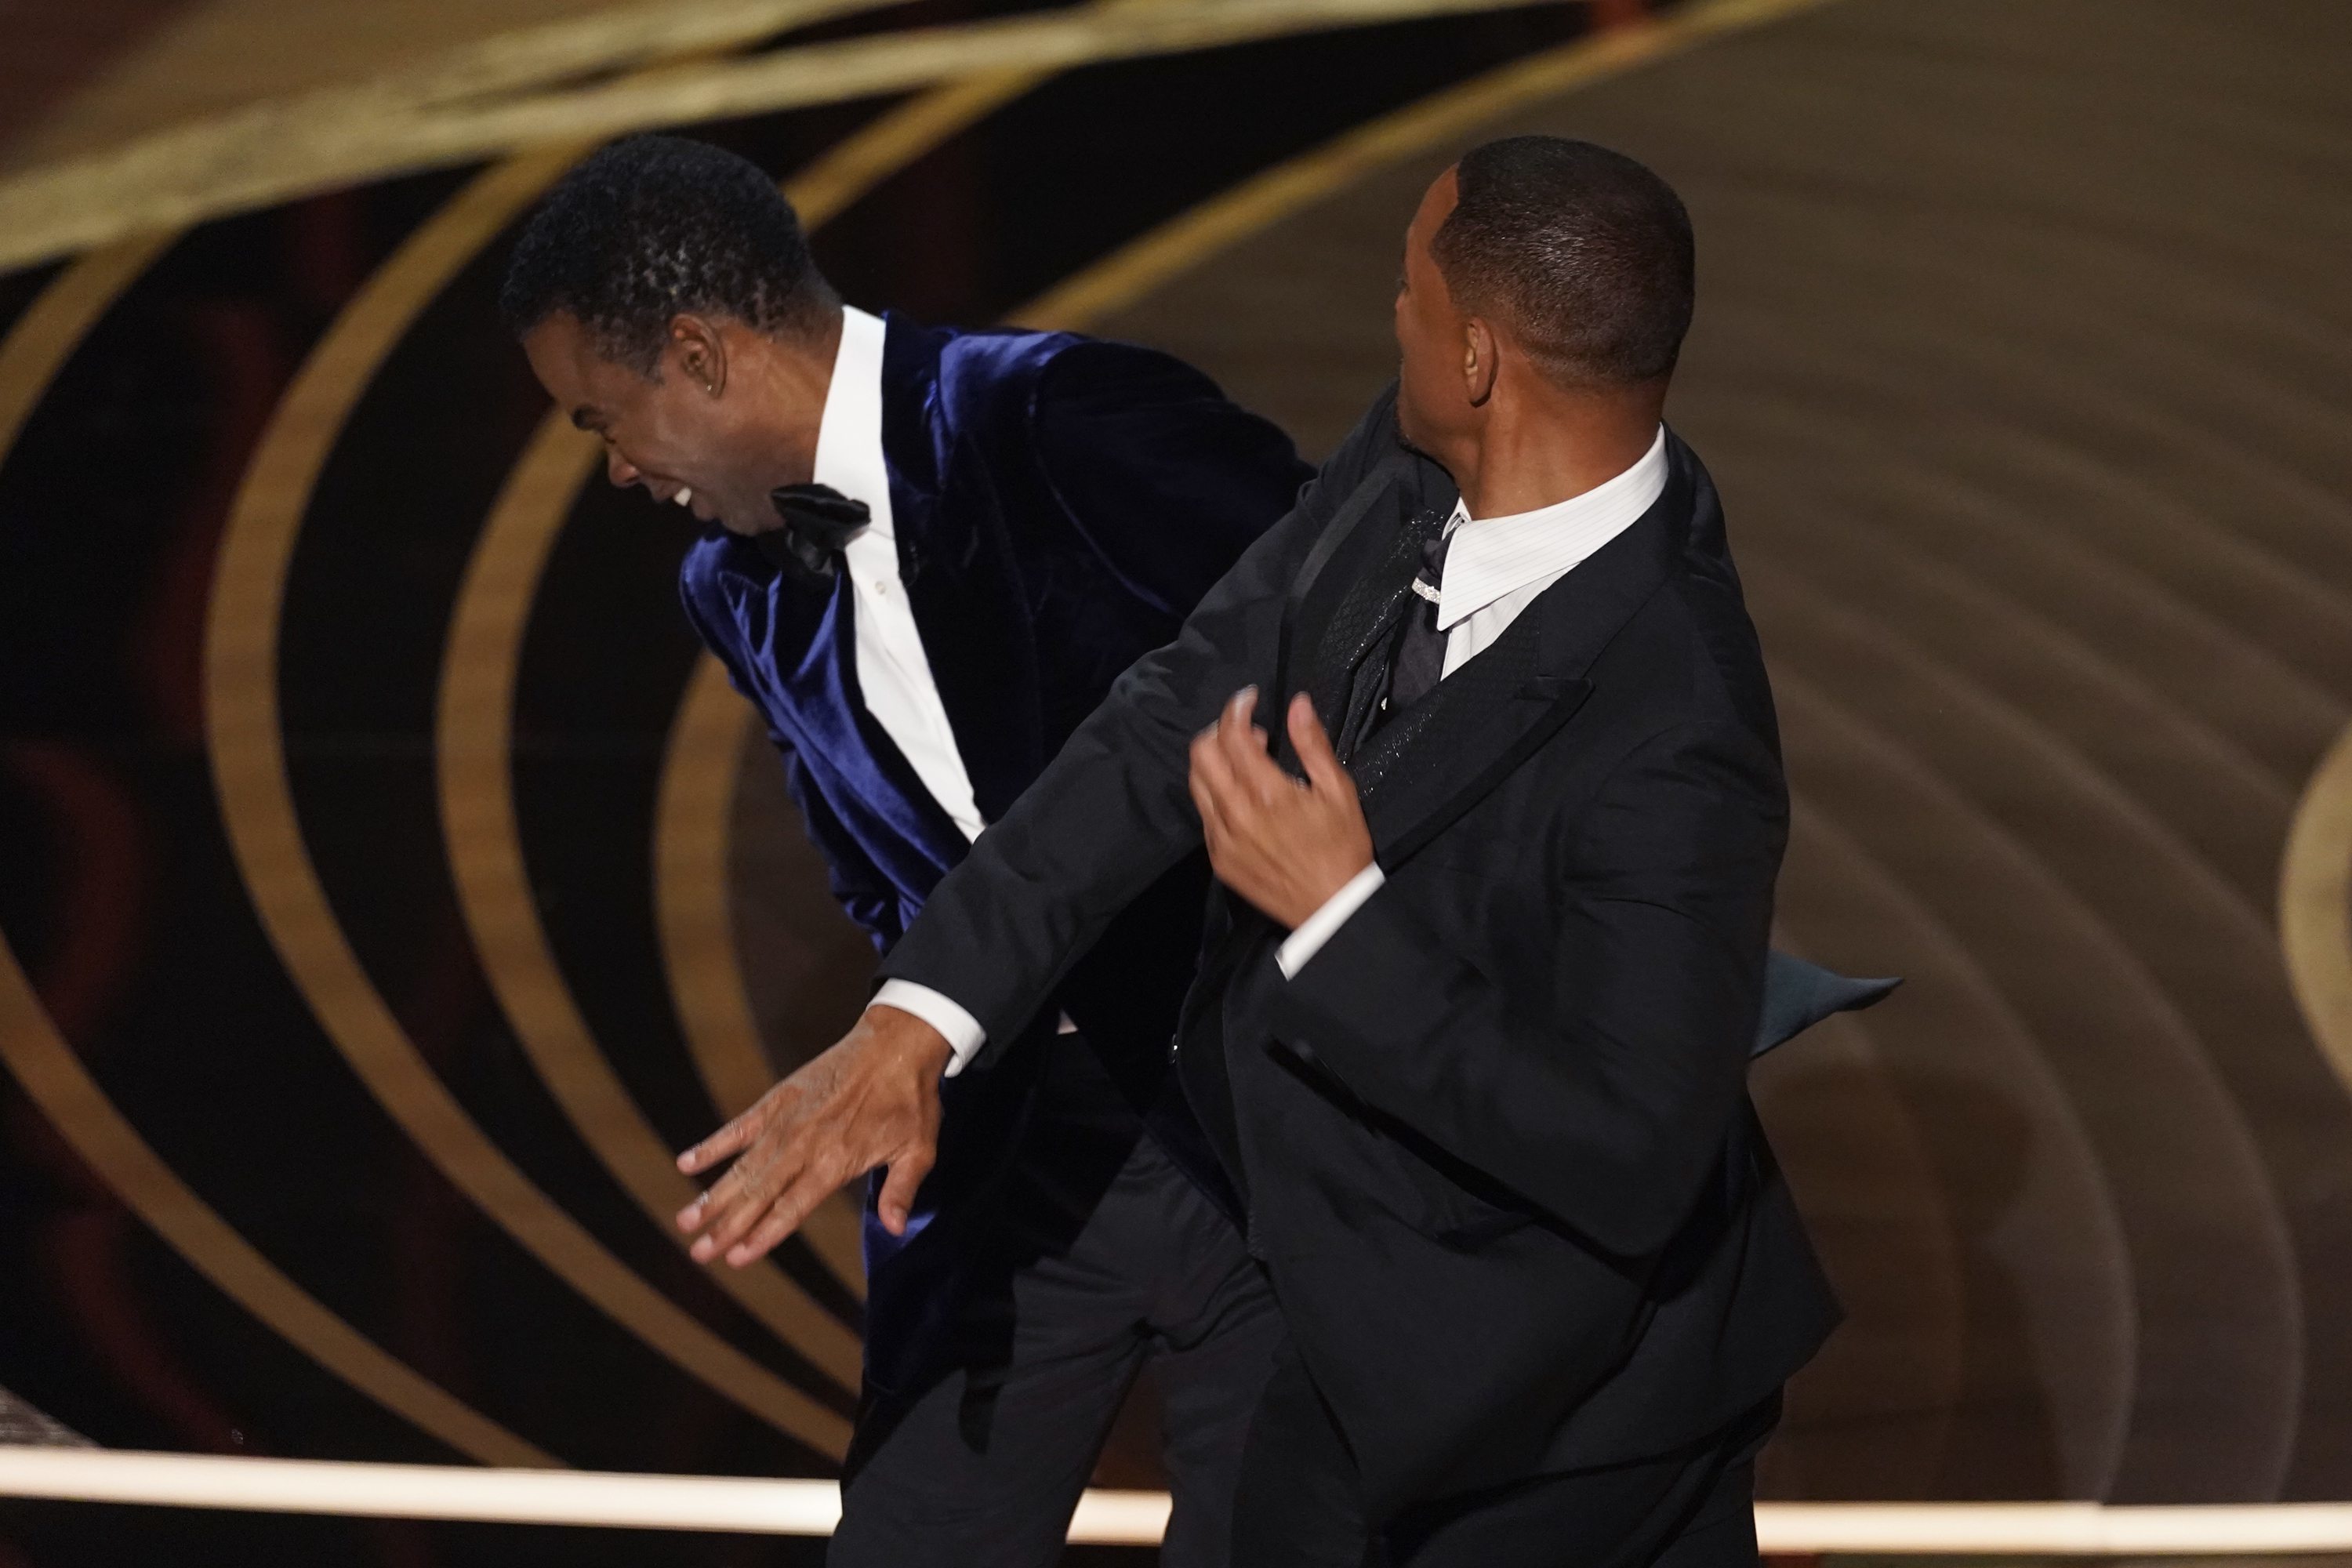 Everything you need to know about what happened between Will Smith and Chris Rock